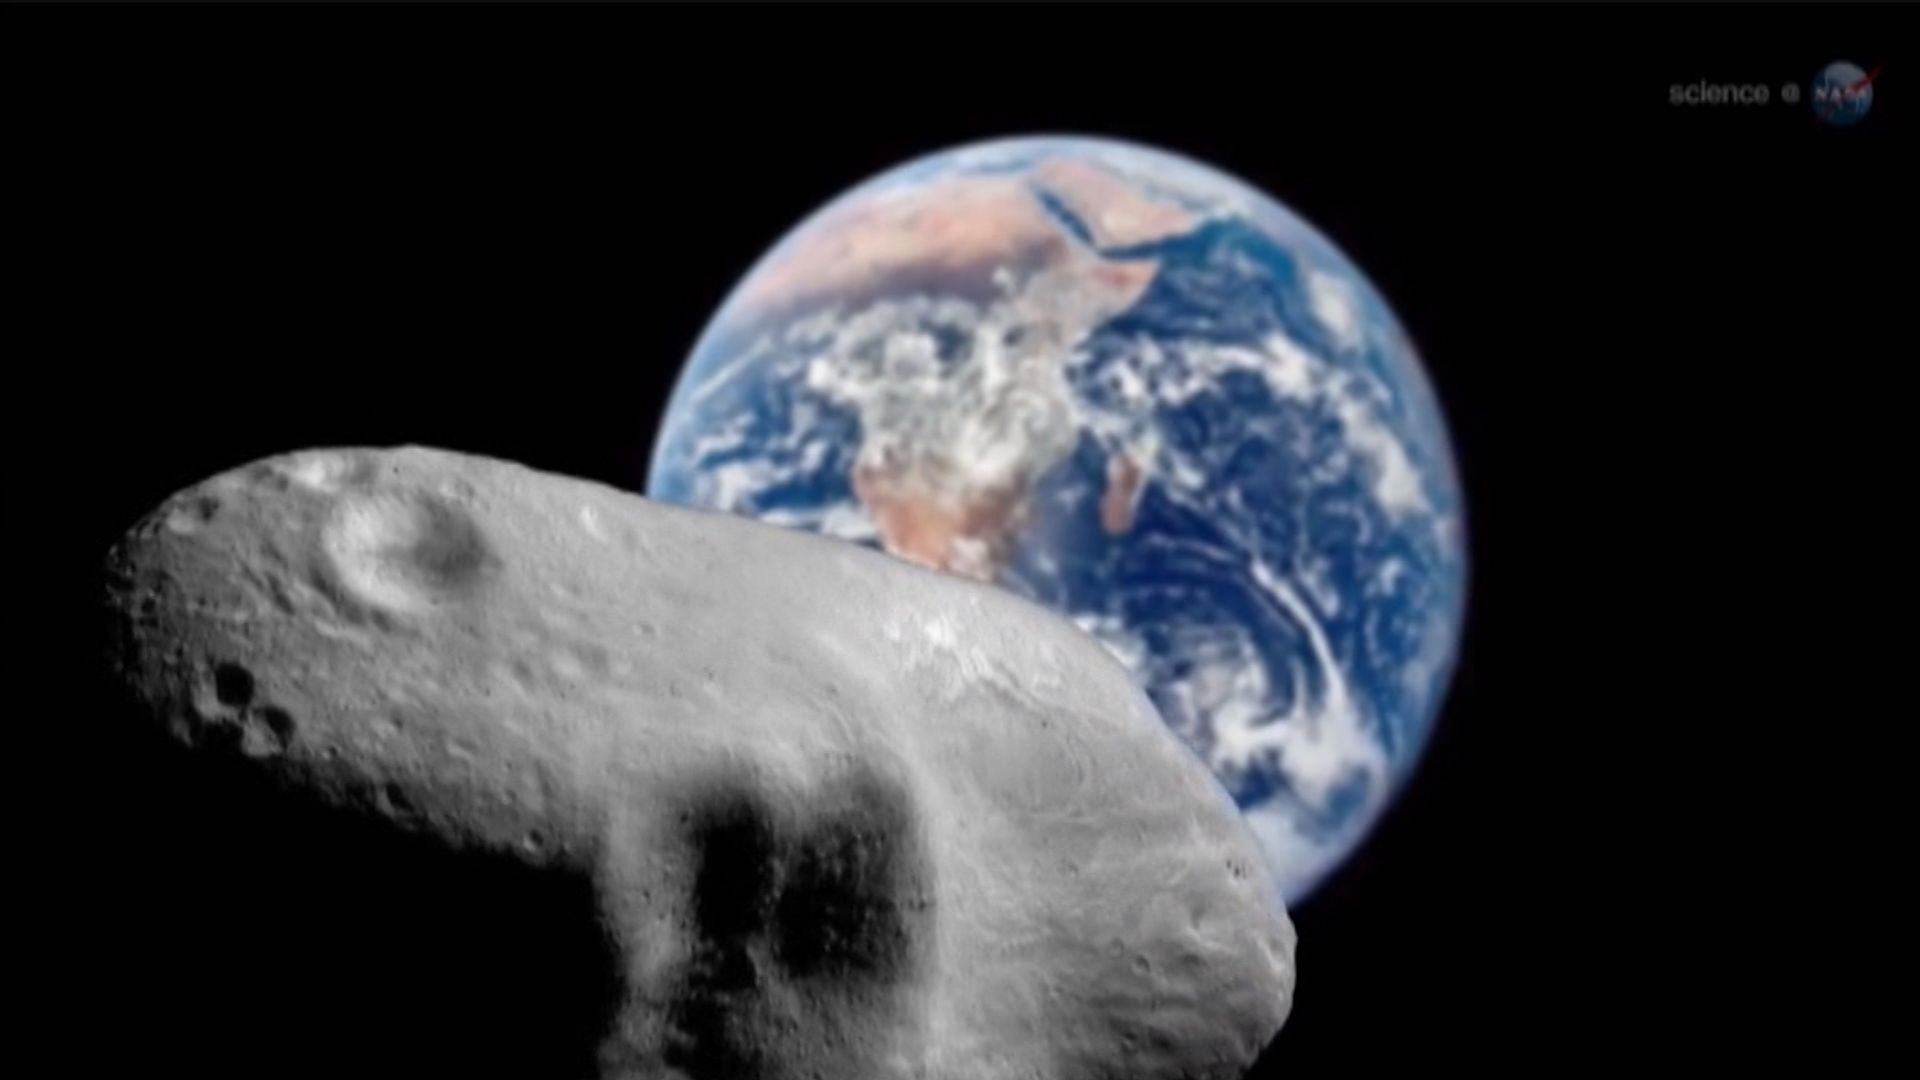 An asteroid was officially named after SOPHIE last year